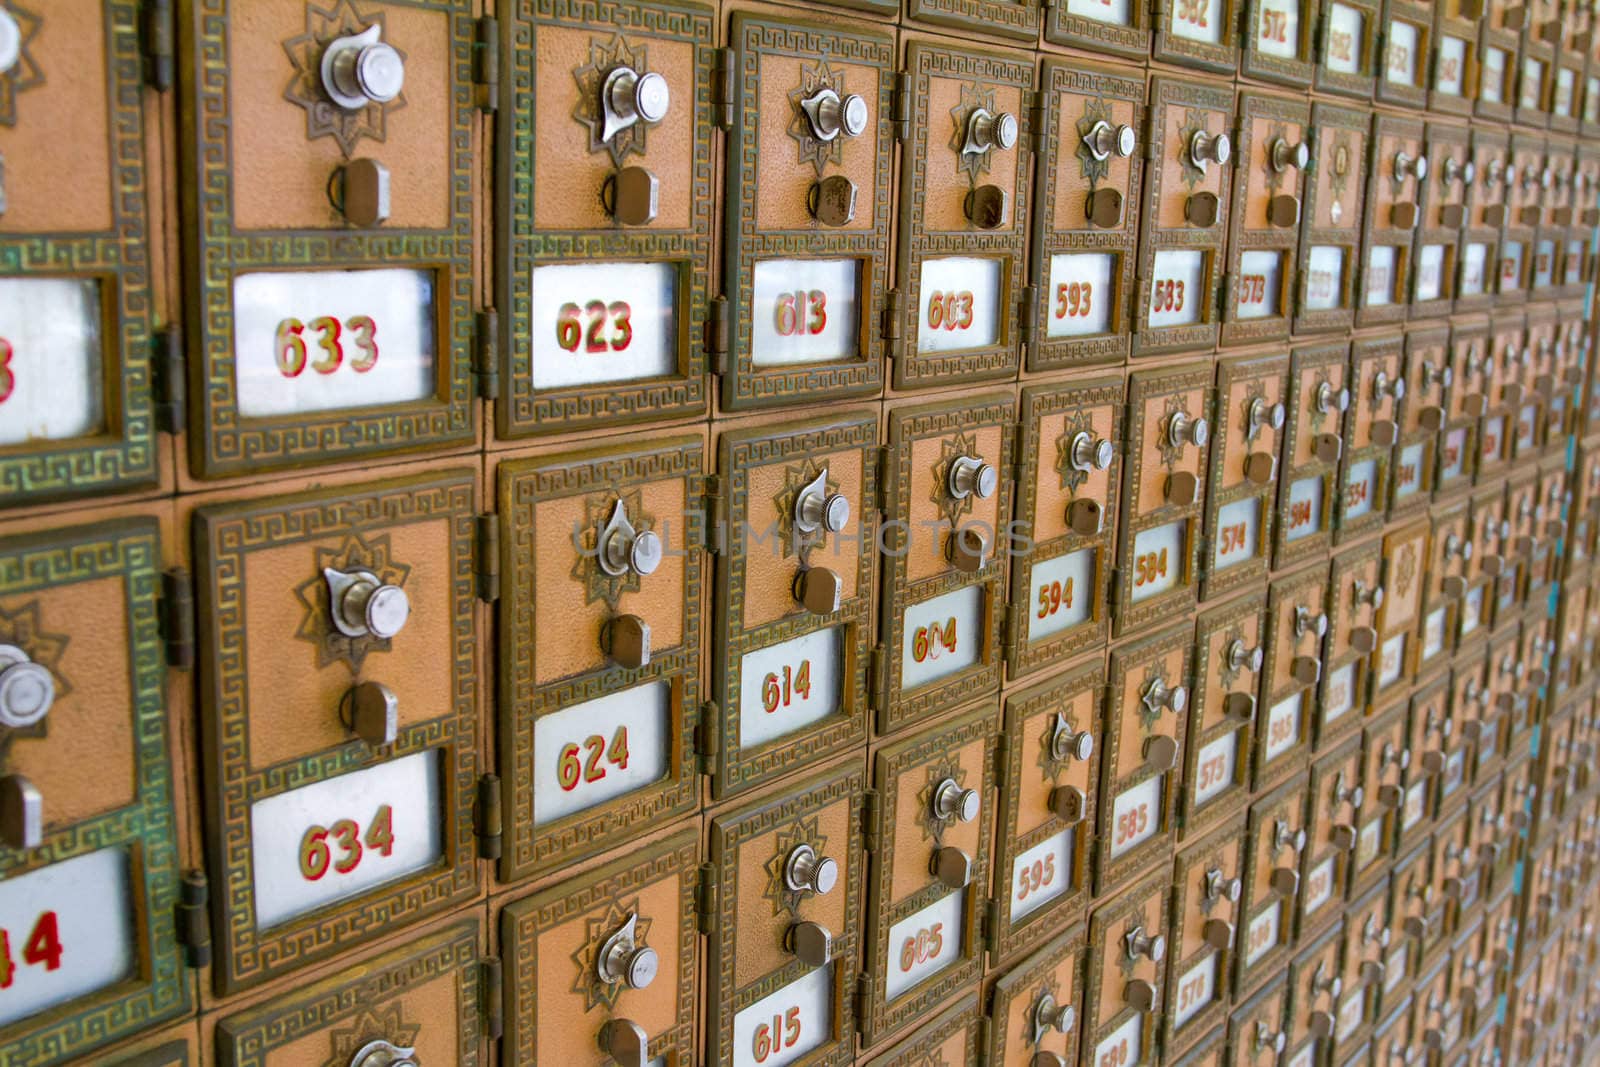 This photo shows the many po boxes at the post office. The mail boxes are lined up in rows and columns for organization.